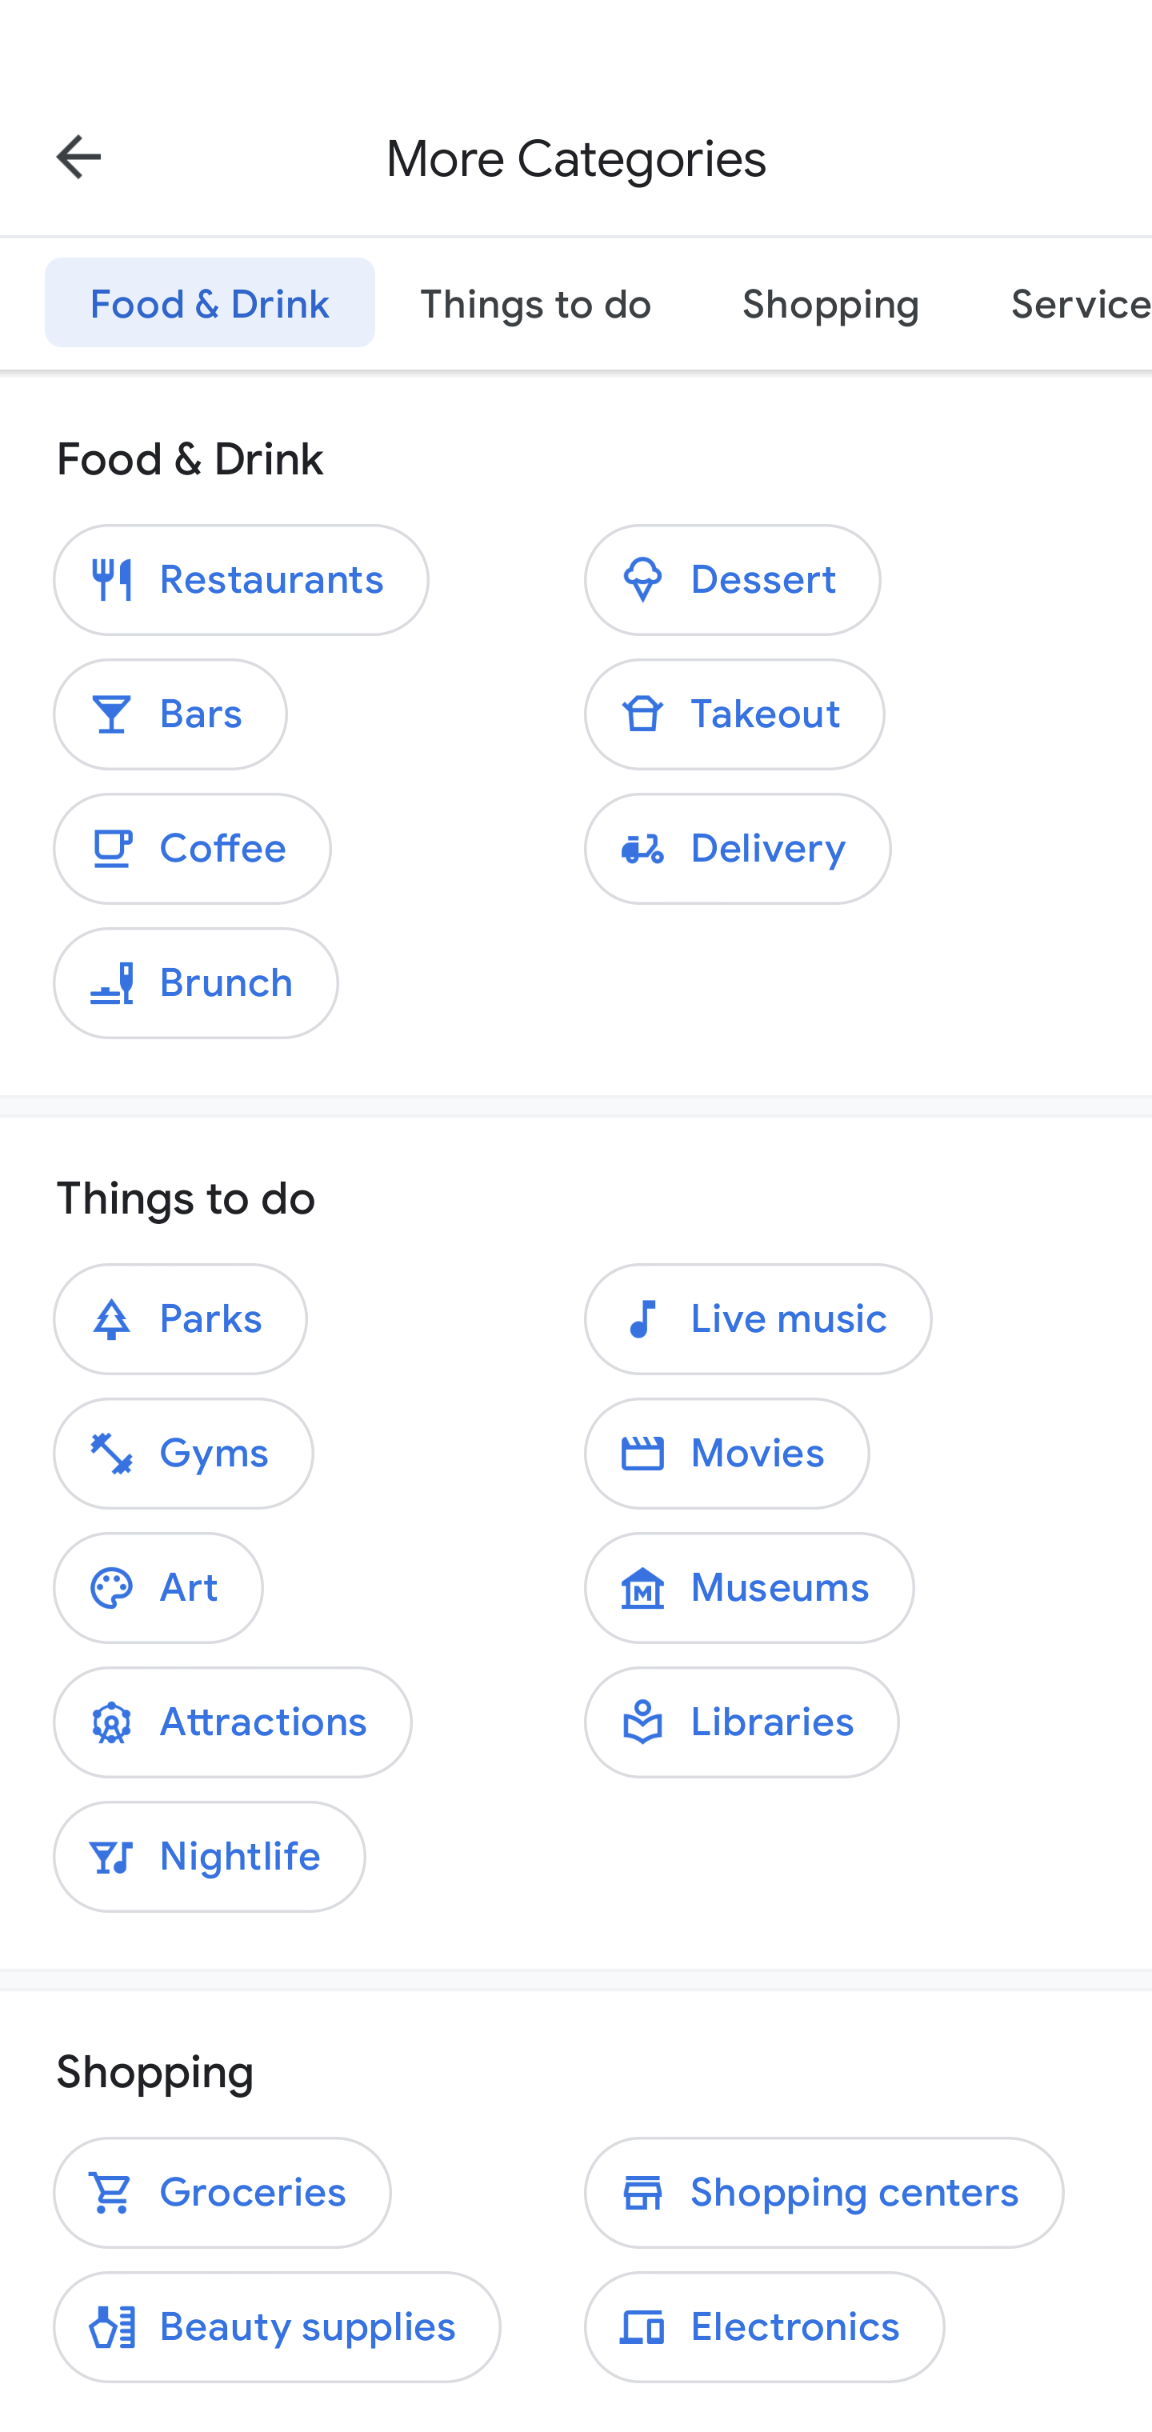 The Google Maps app displays a page title "More Categories. It shows categories such as Food & Drink, Things to do, and Shopping, with subcategories to select under each category. 